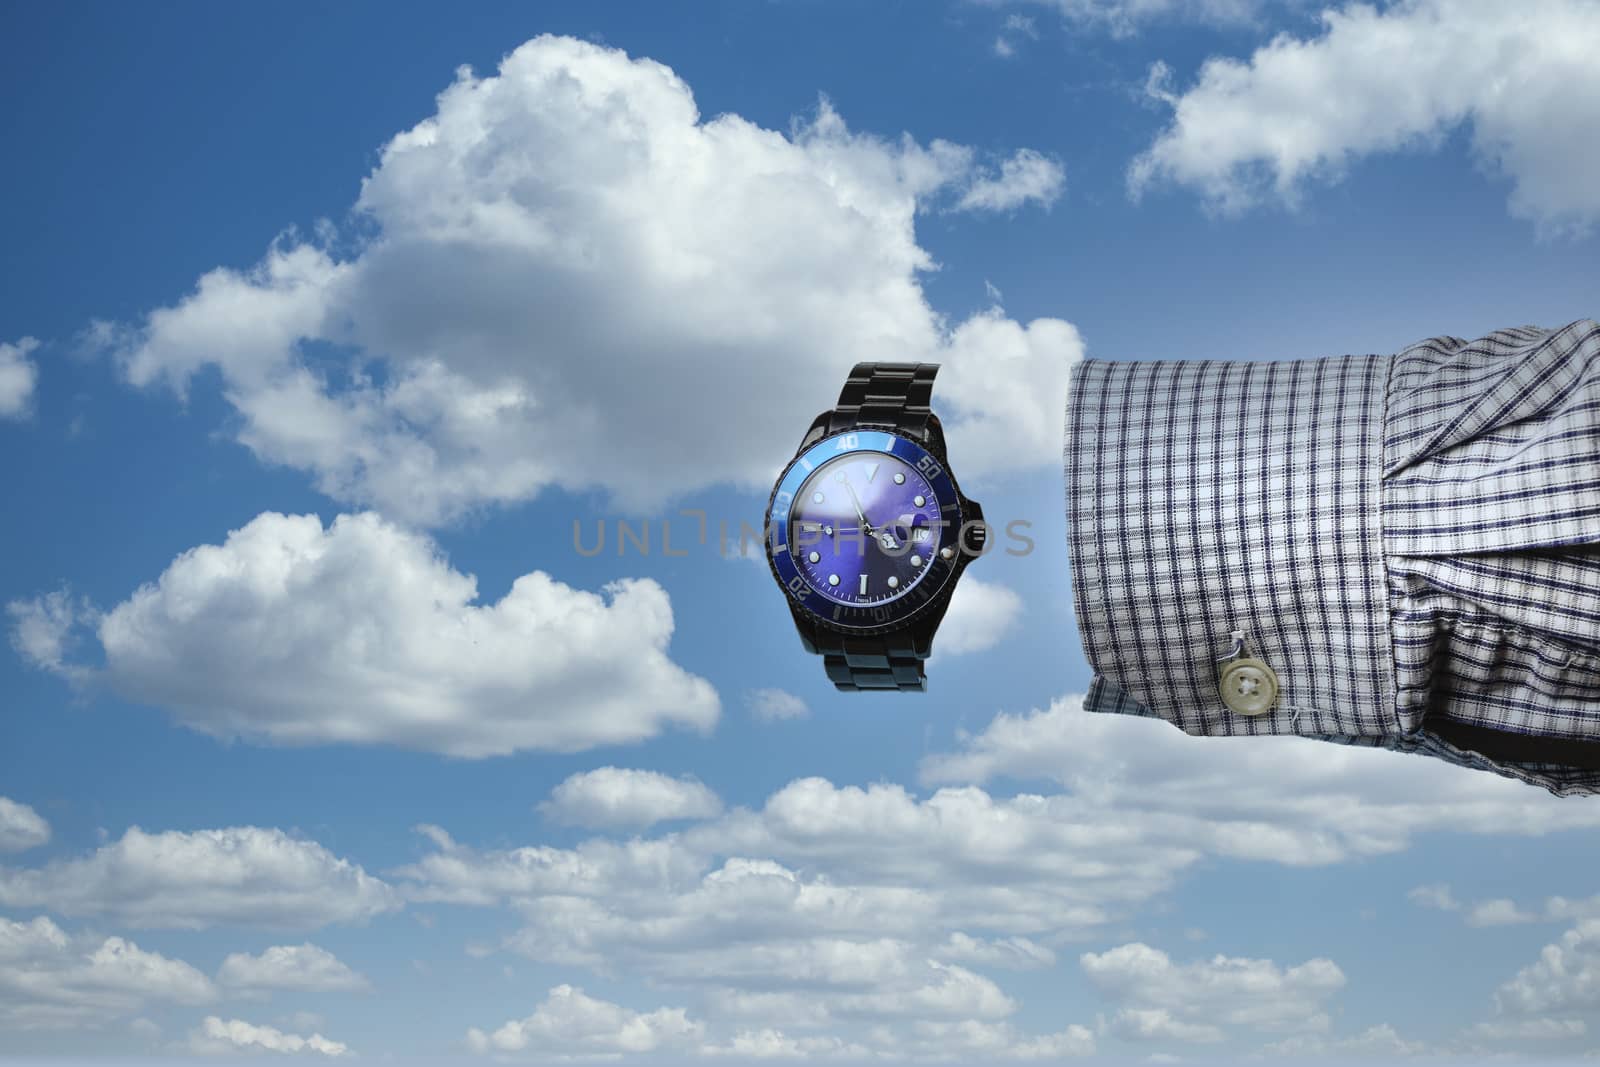 the sleeve of a shirt and a clock with no hand with the cloudy sky in the background